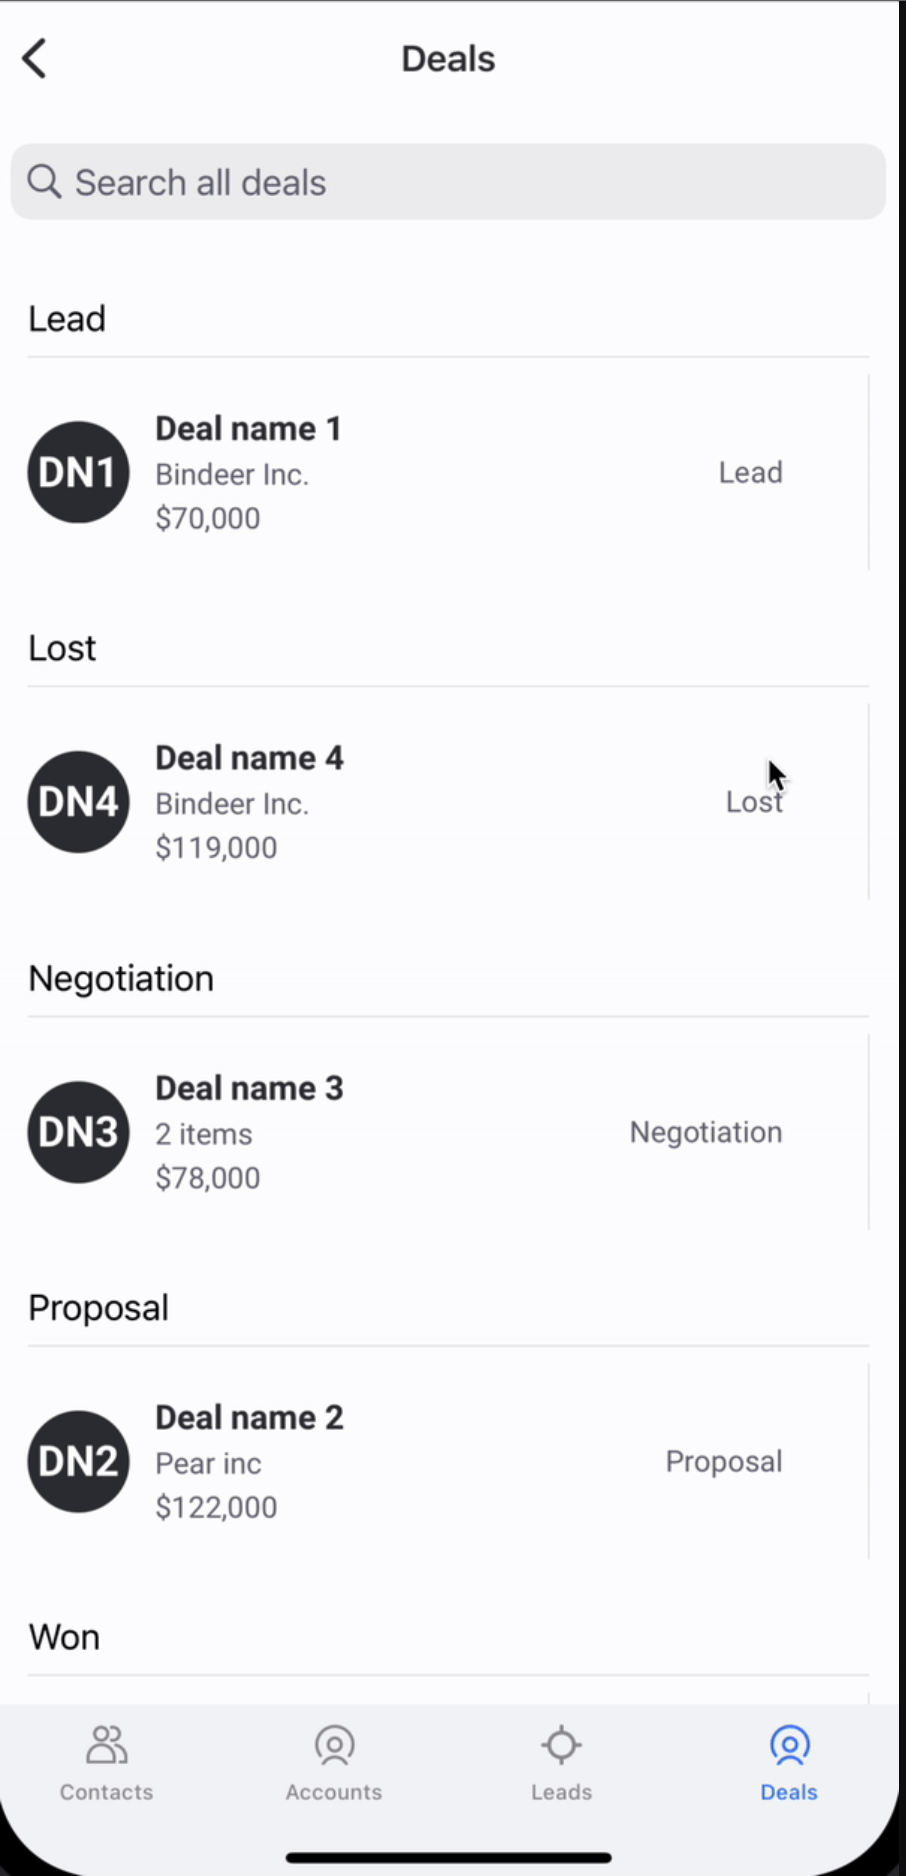 Monday Sales CRM mobile app experience screenshot